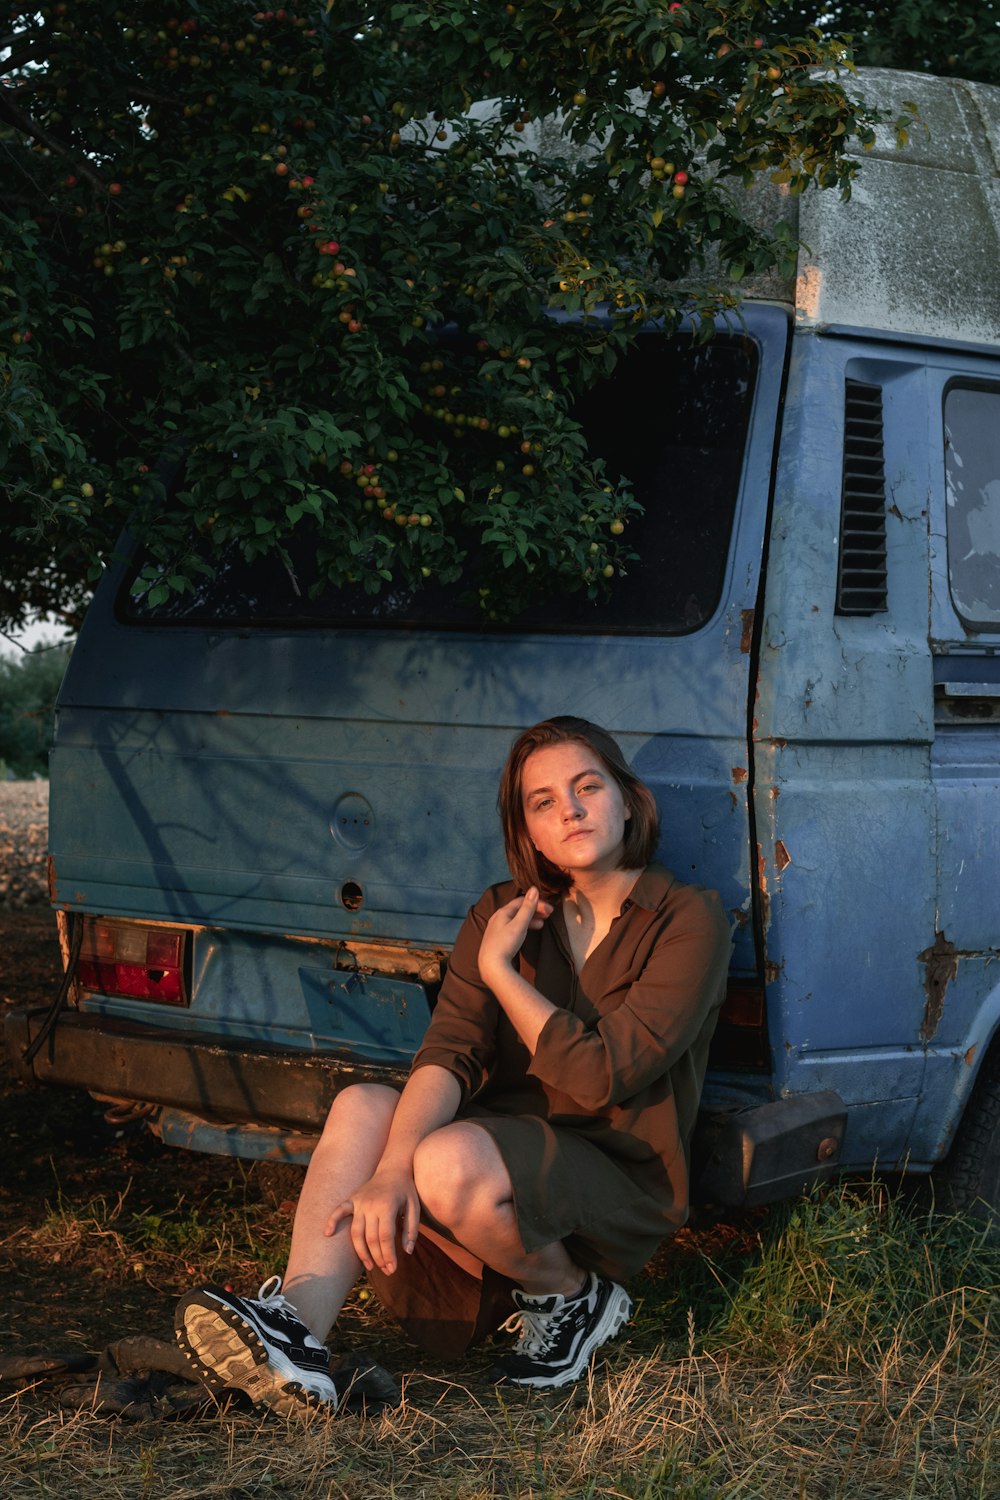 a woman sitting on the ground next to a van